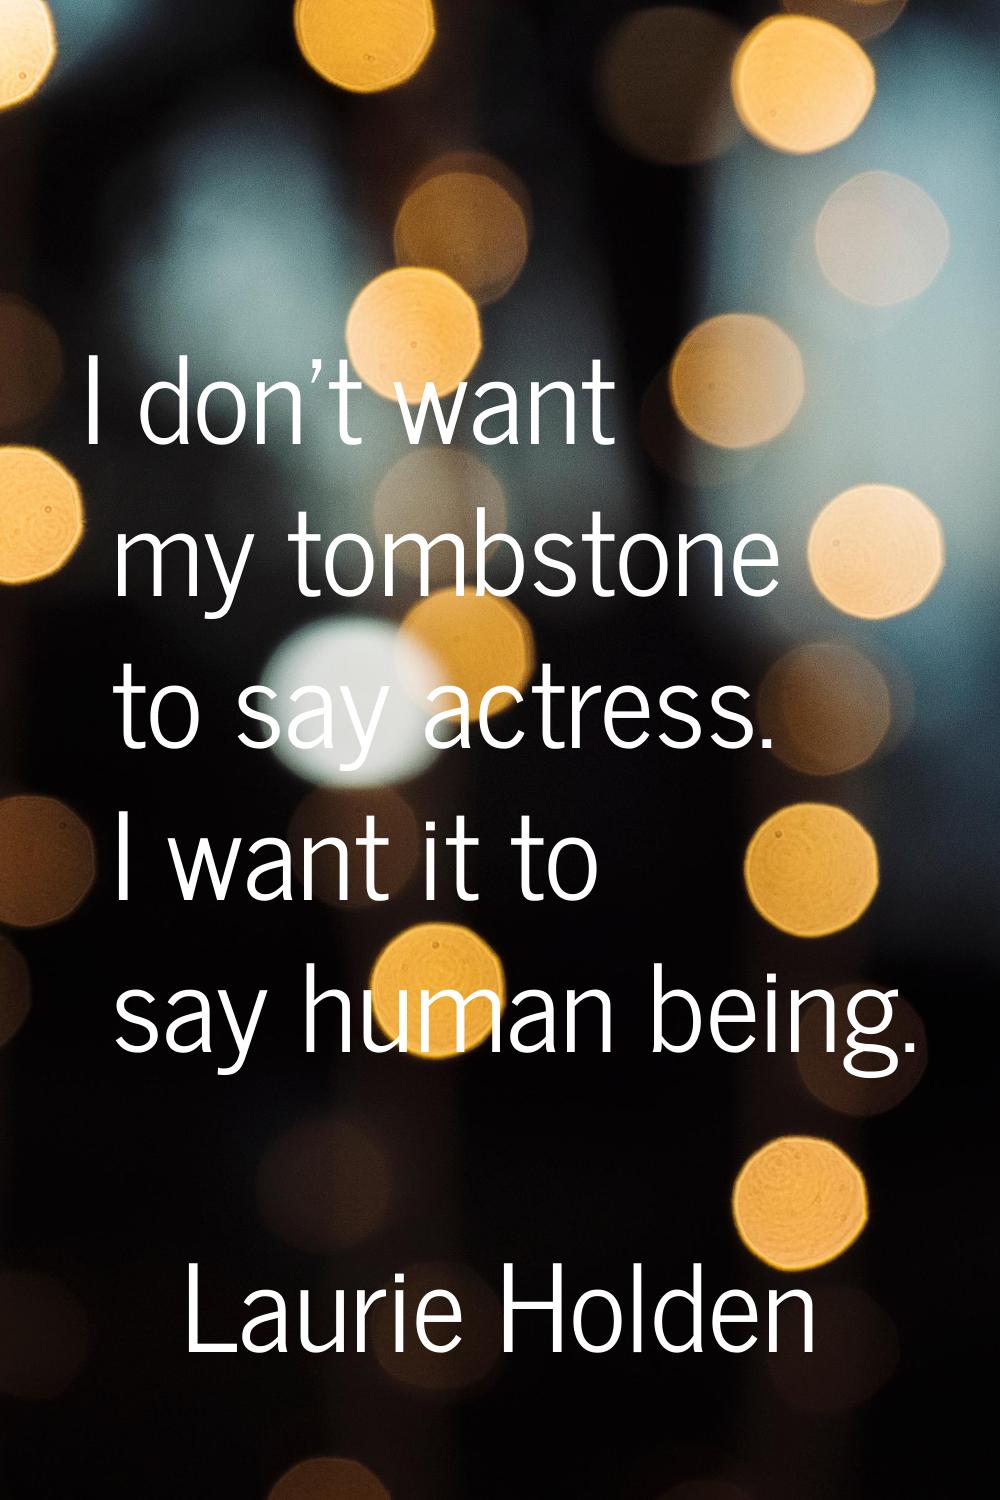 I don't want my tombstone to say actress. I want it to say human being.